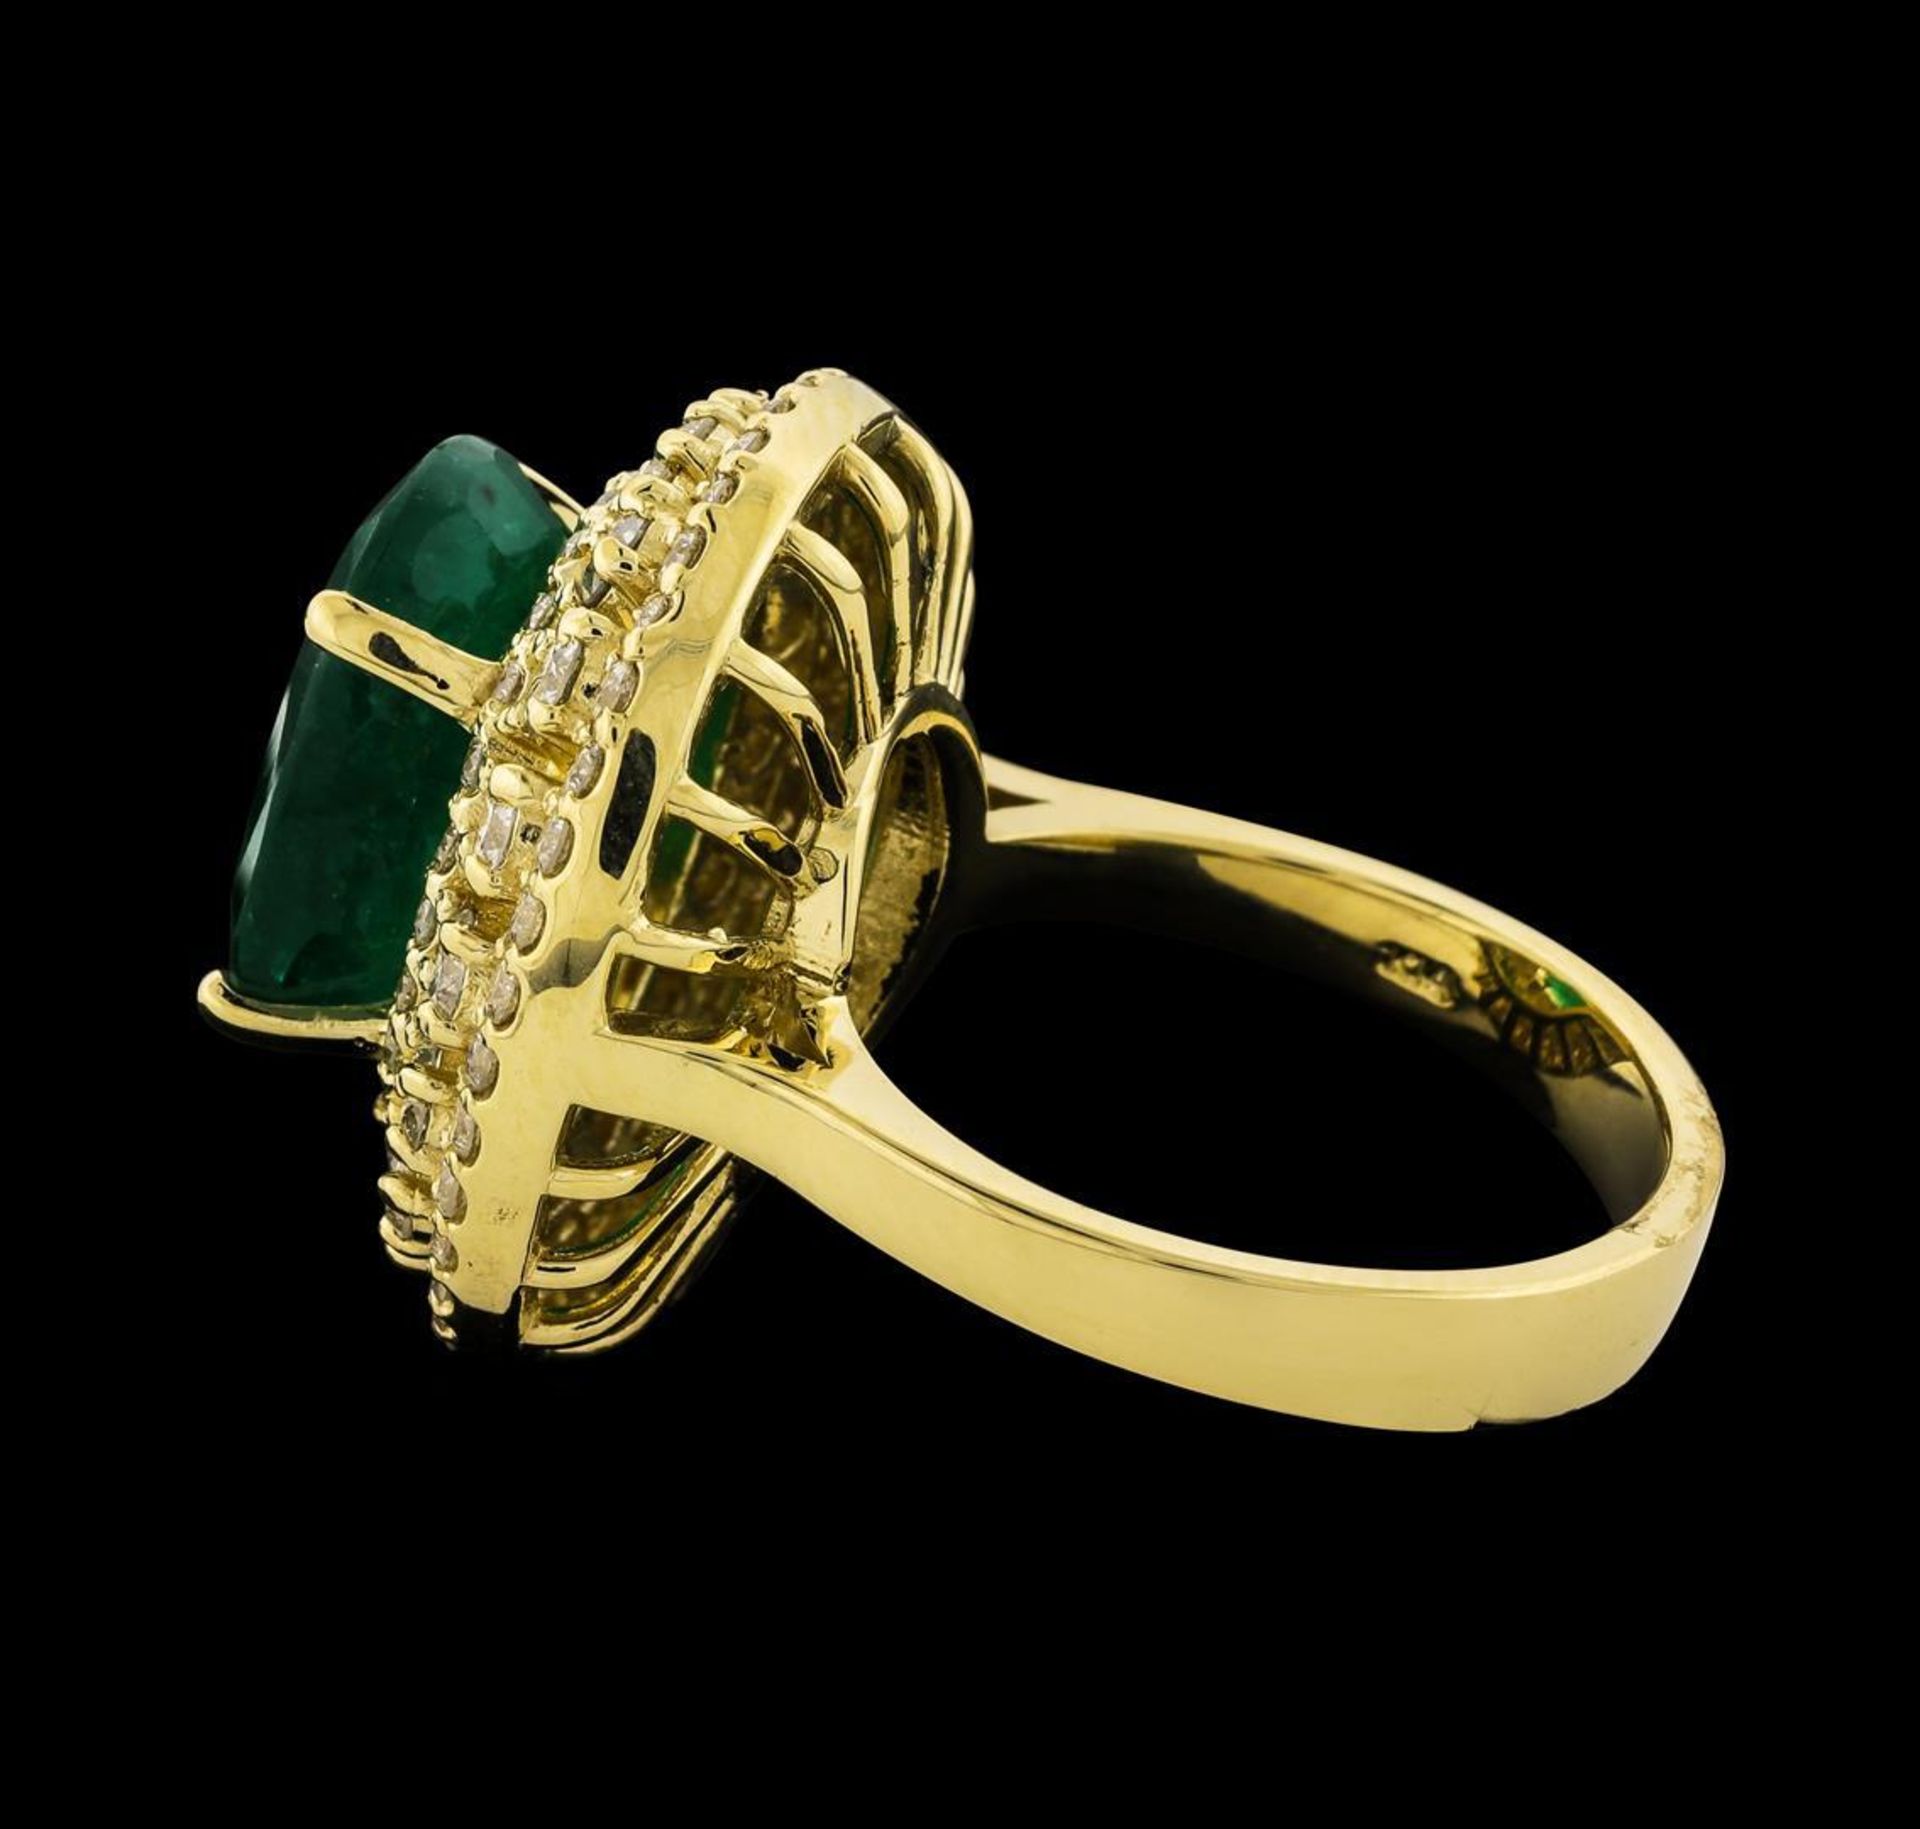 6.63 ctw Emerald and Diamond Ring - 14KT Yellow Gold - Image 3 of 5